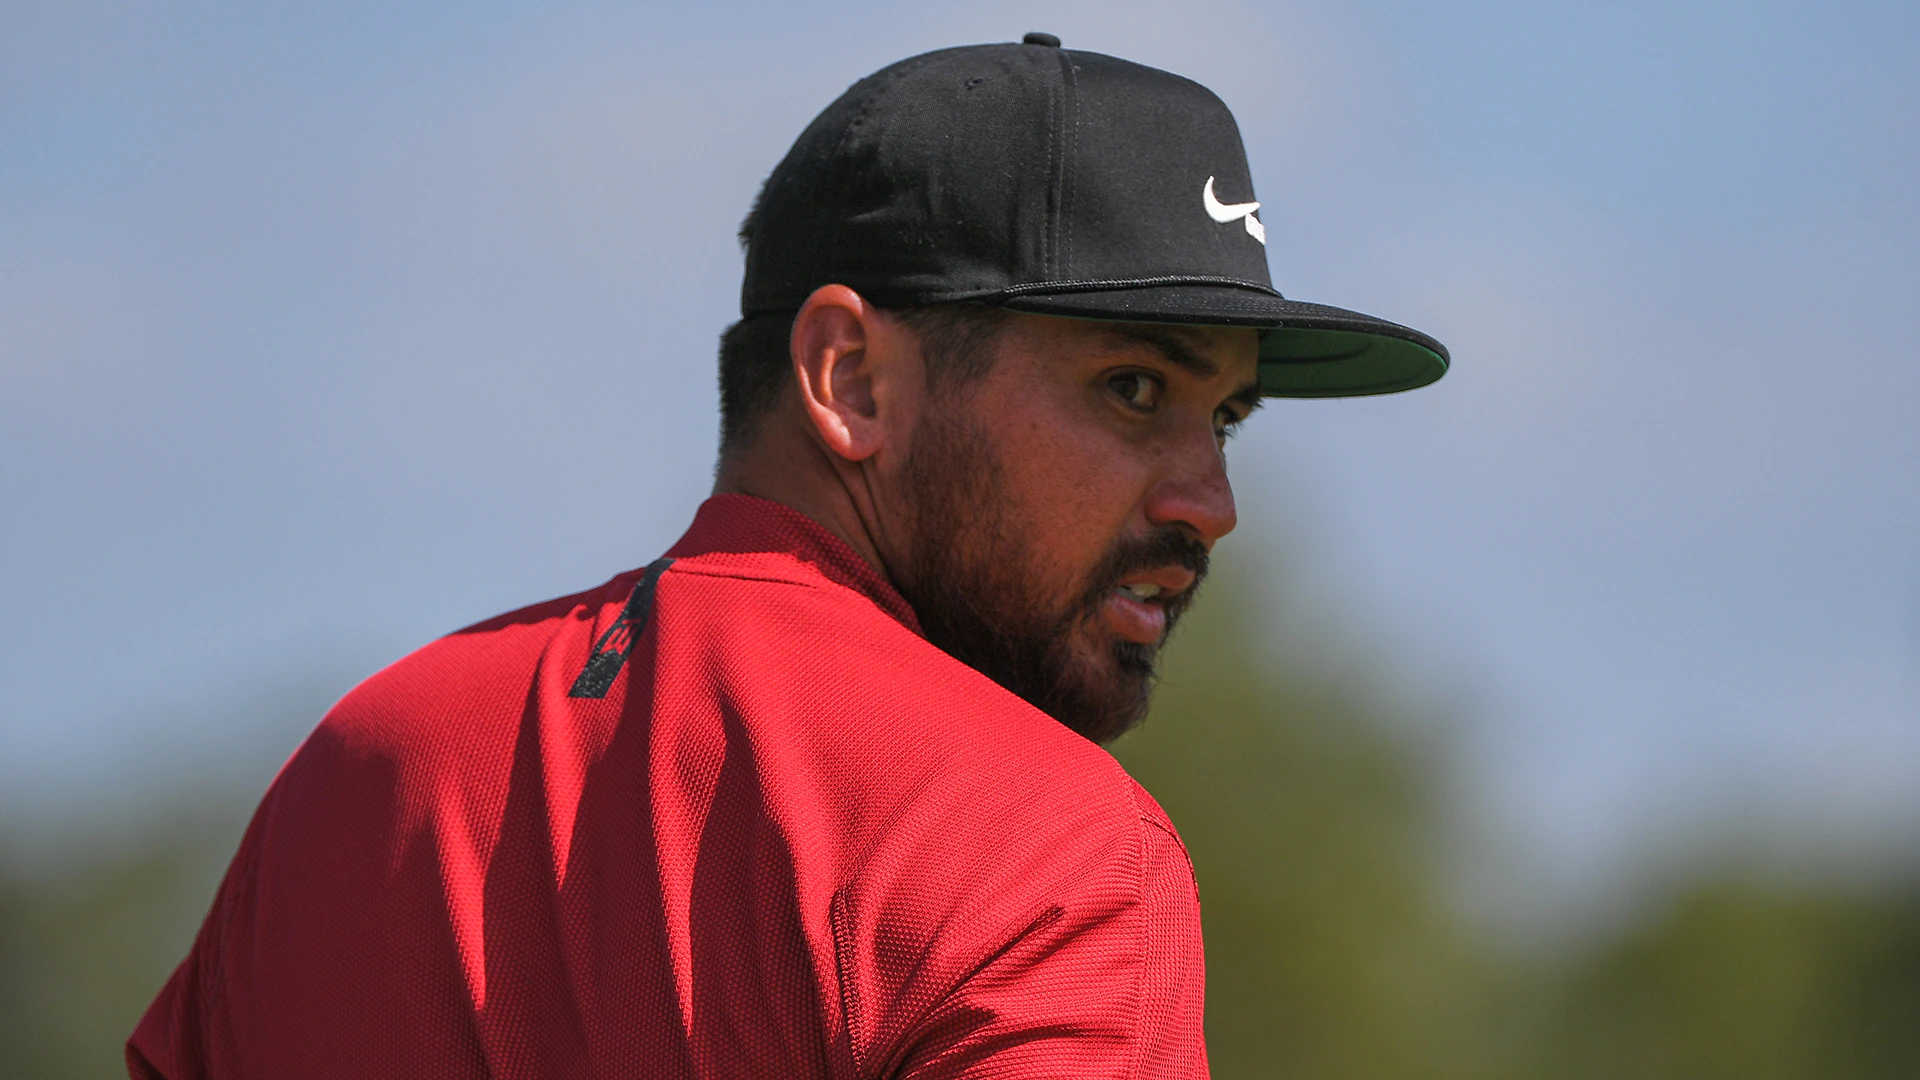 Photos: Players wear red and black for Tiger Woods on Sunday at WGC-Workday